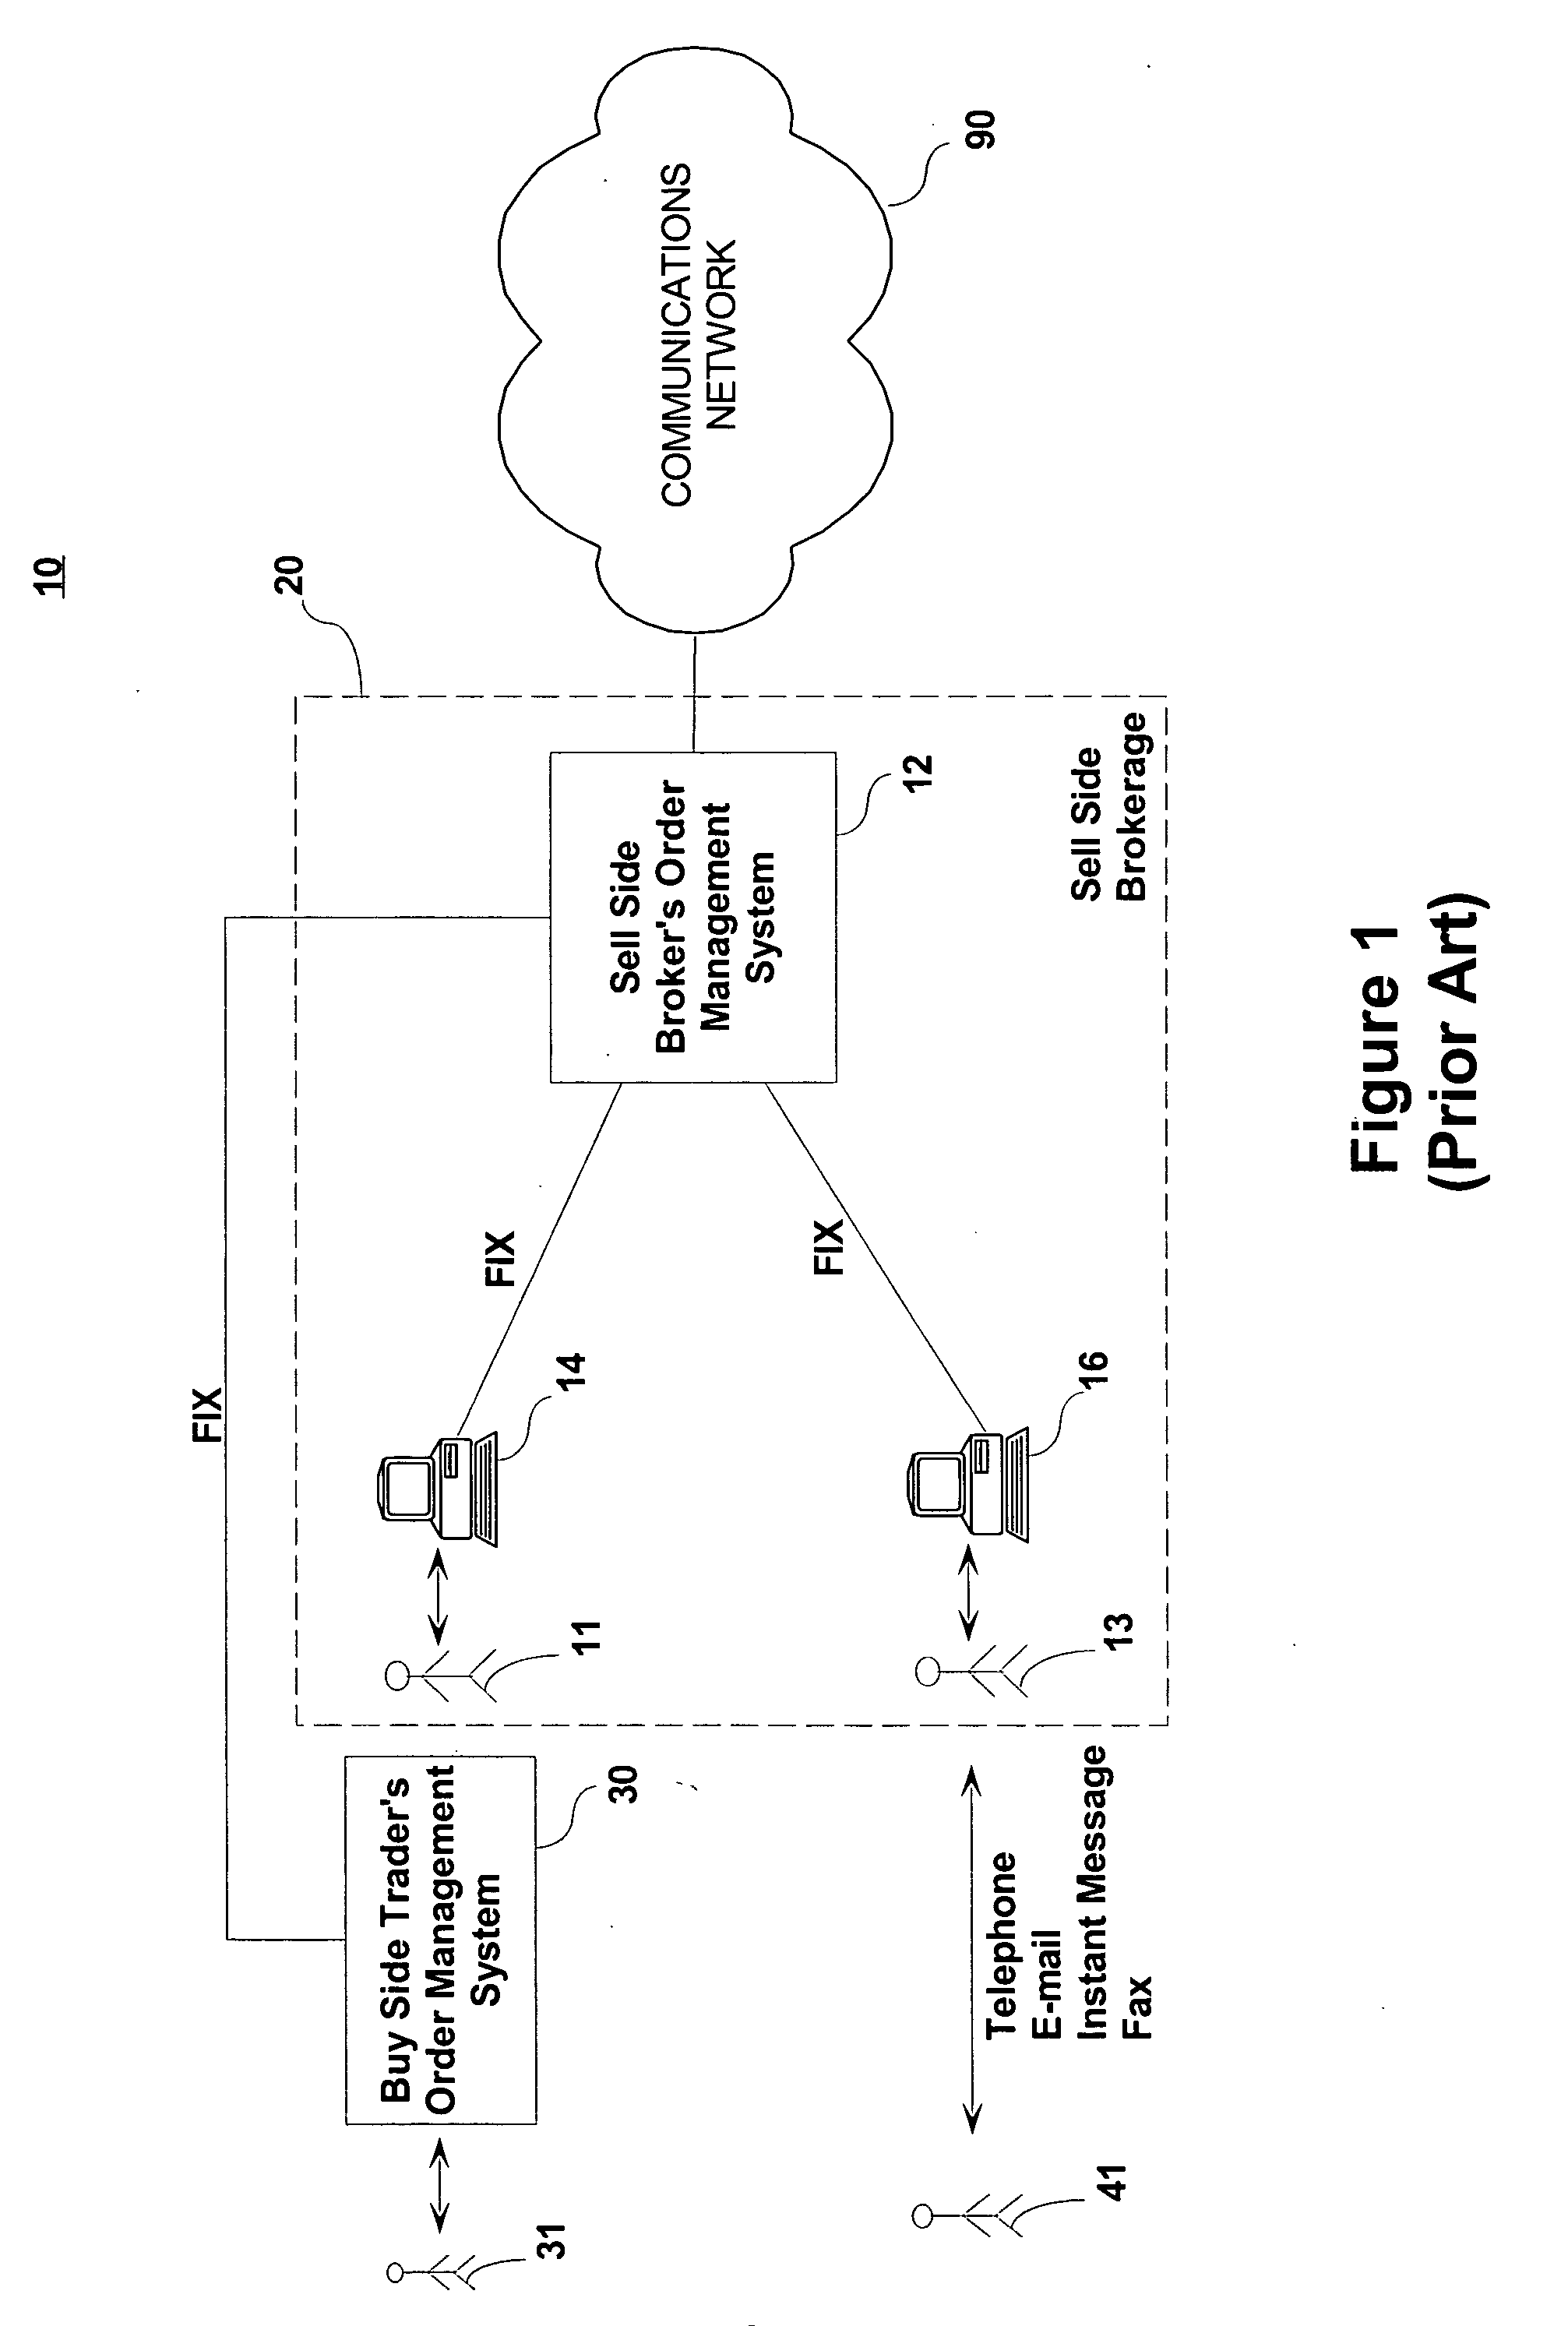 System and method for processing securities trading instructions and commnicating order status via a messaging interface